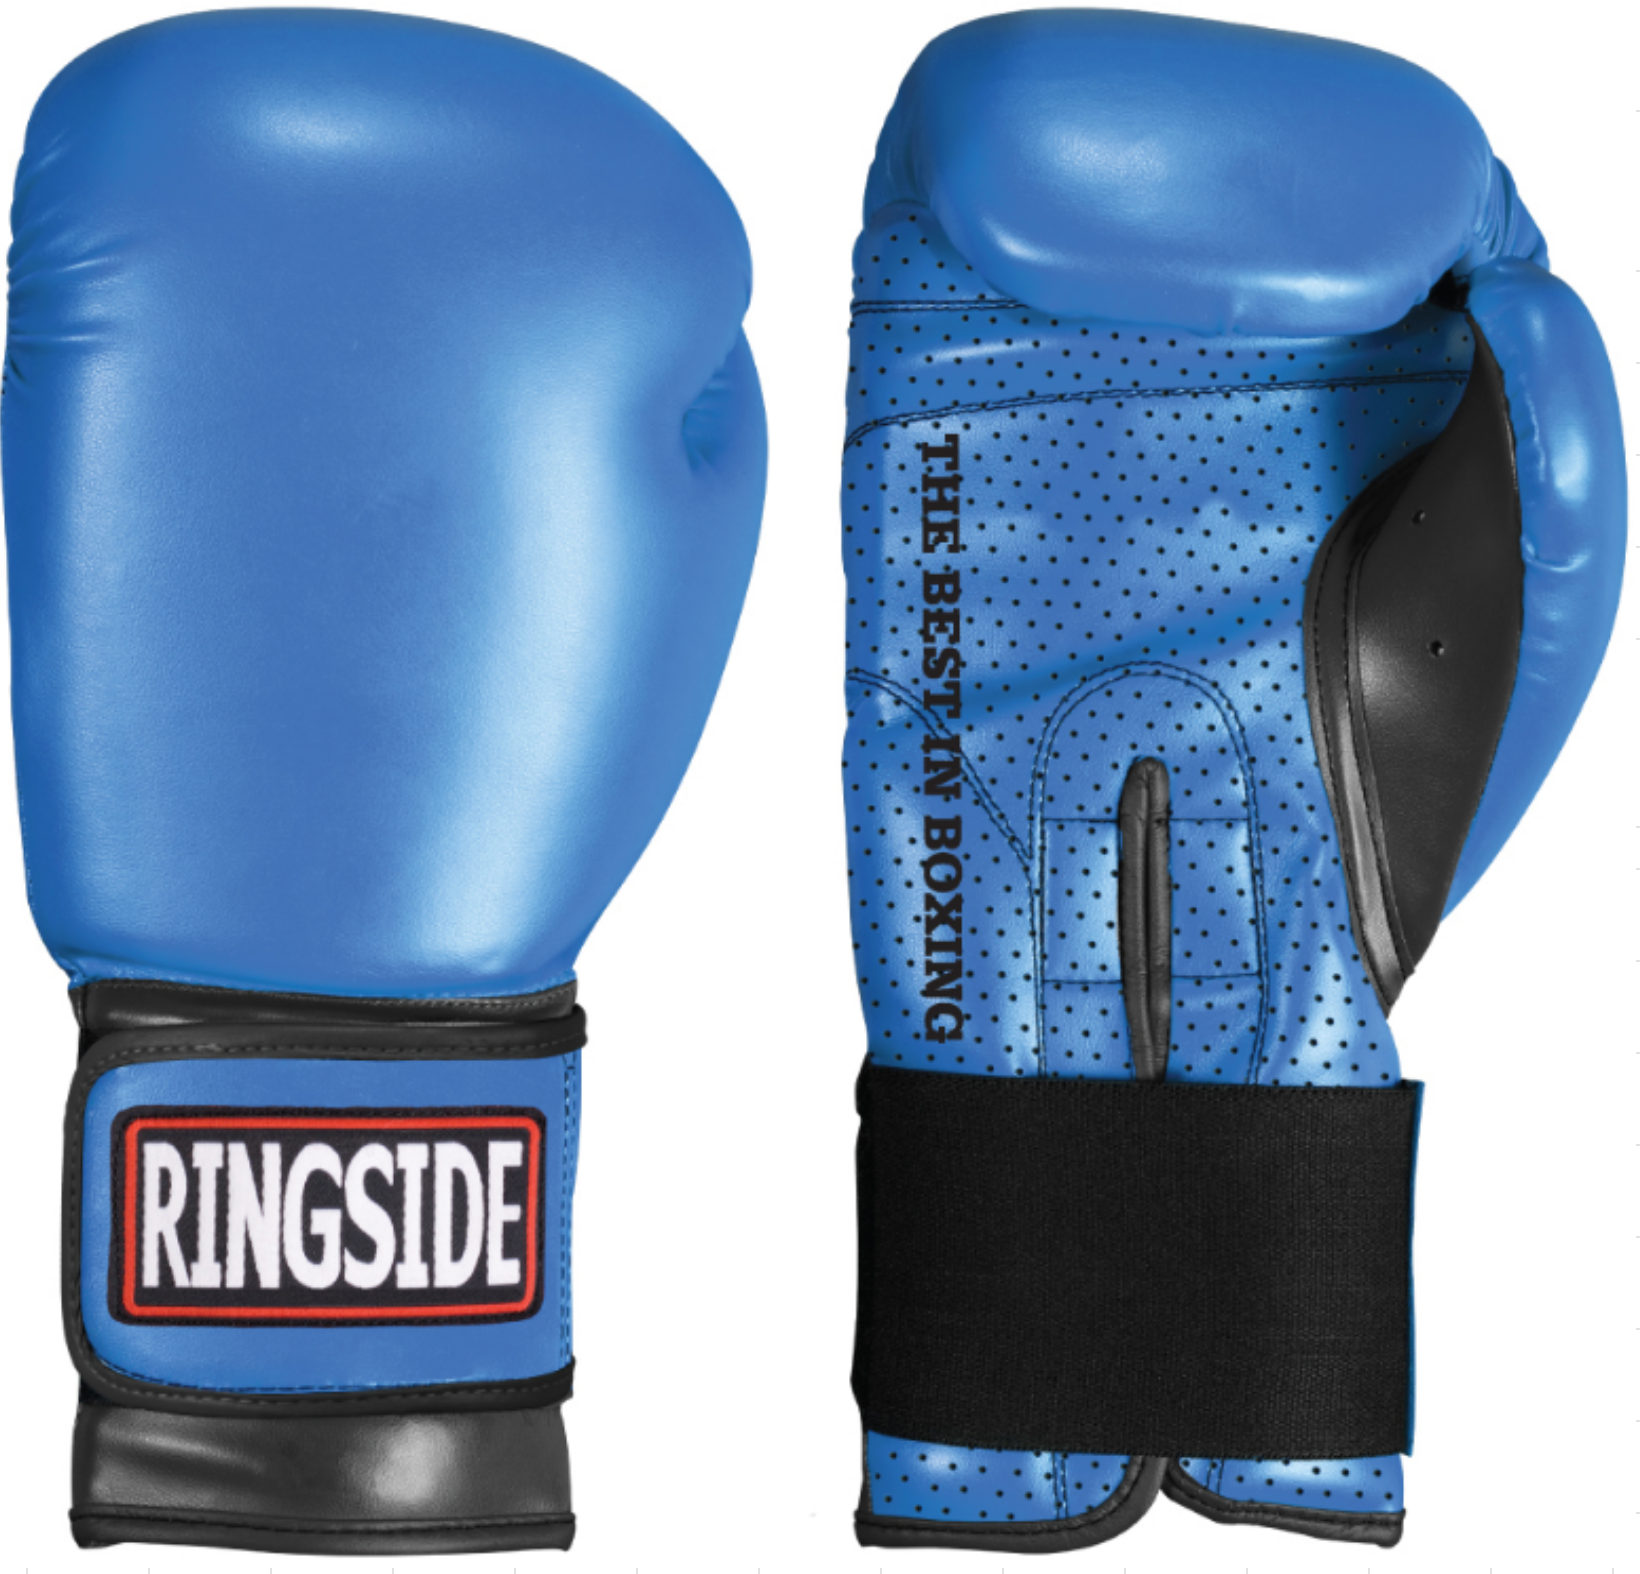 Shop Extreme Fitness Boxing Gloves From Ringside Online